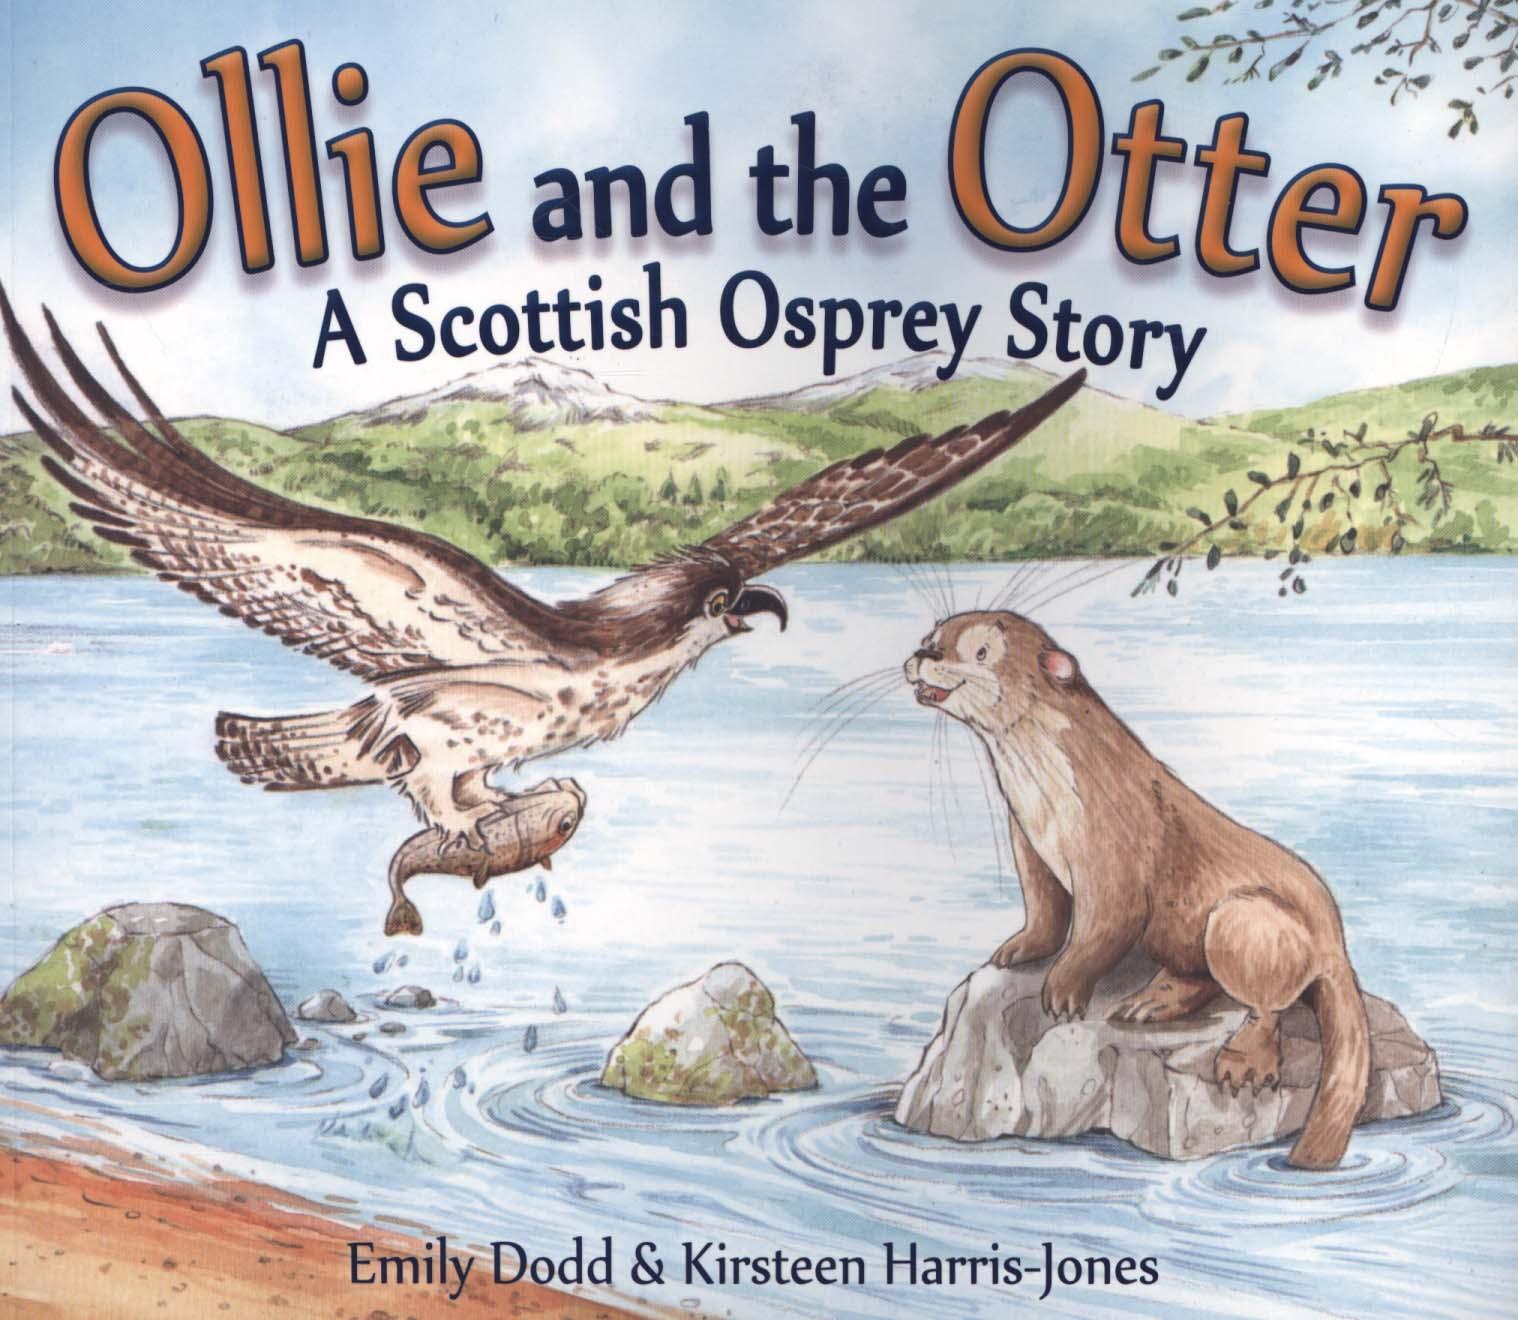 Ollie and the Otter